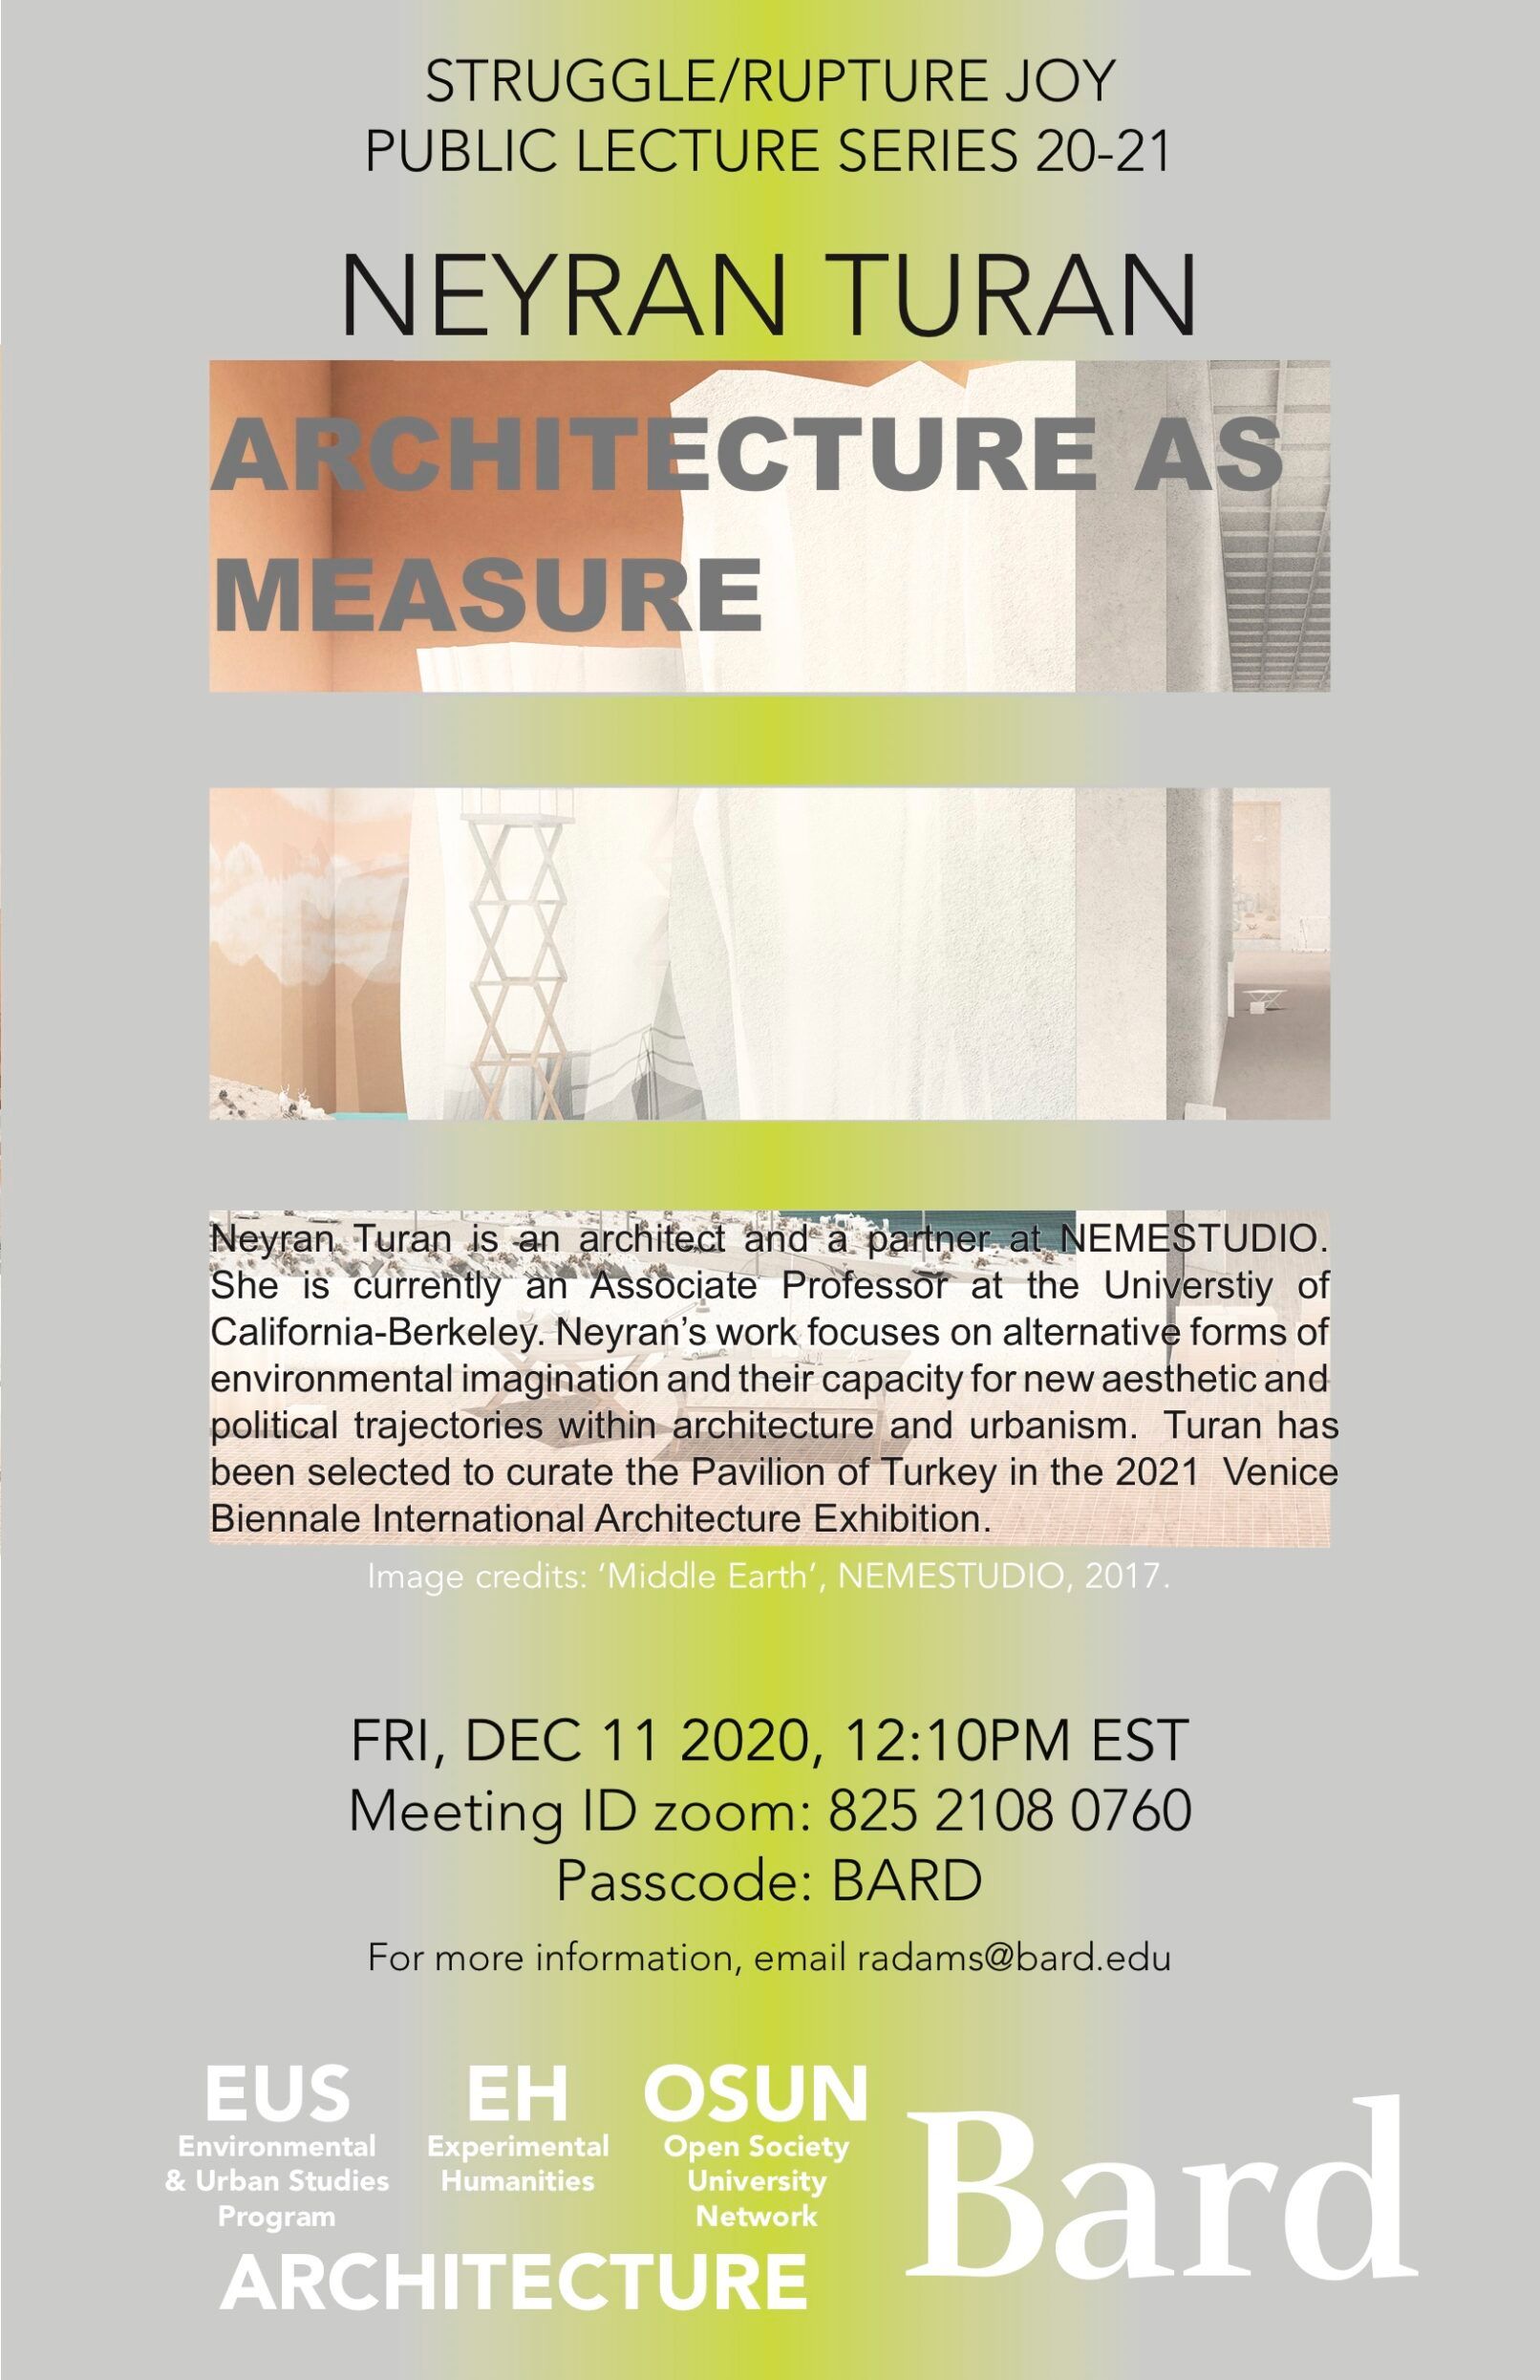 Poster for the lecture. Text reads: Struggle/Rupture Joy. Public Lecture Series 20-21. Neyran Turan: Architecture as Measure